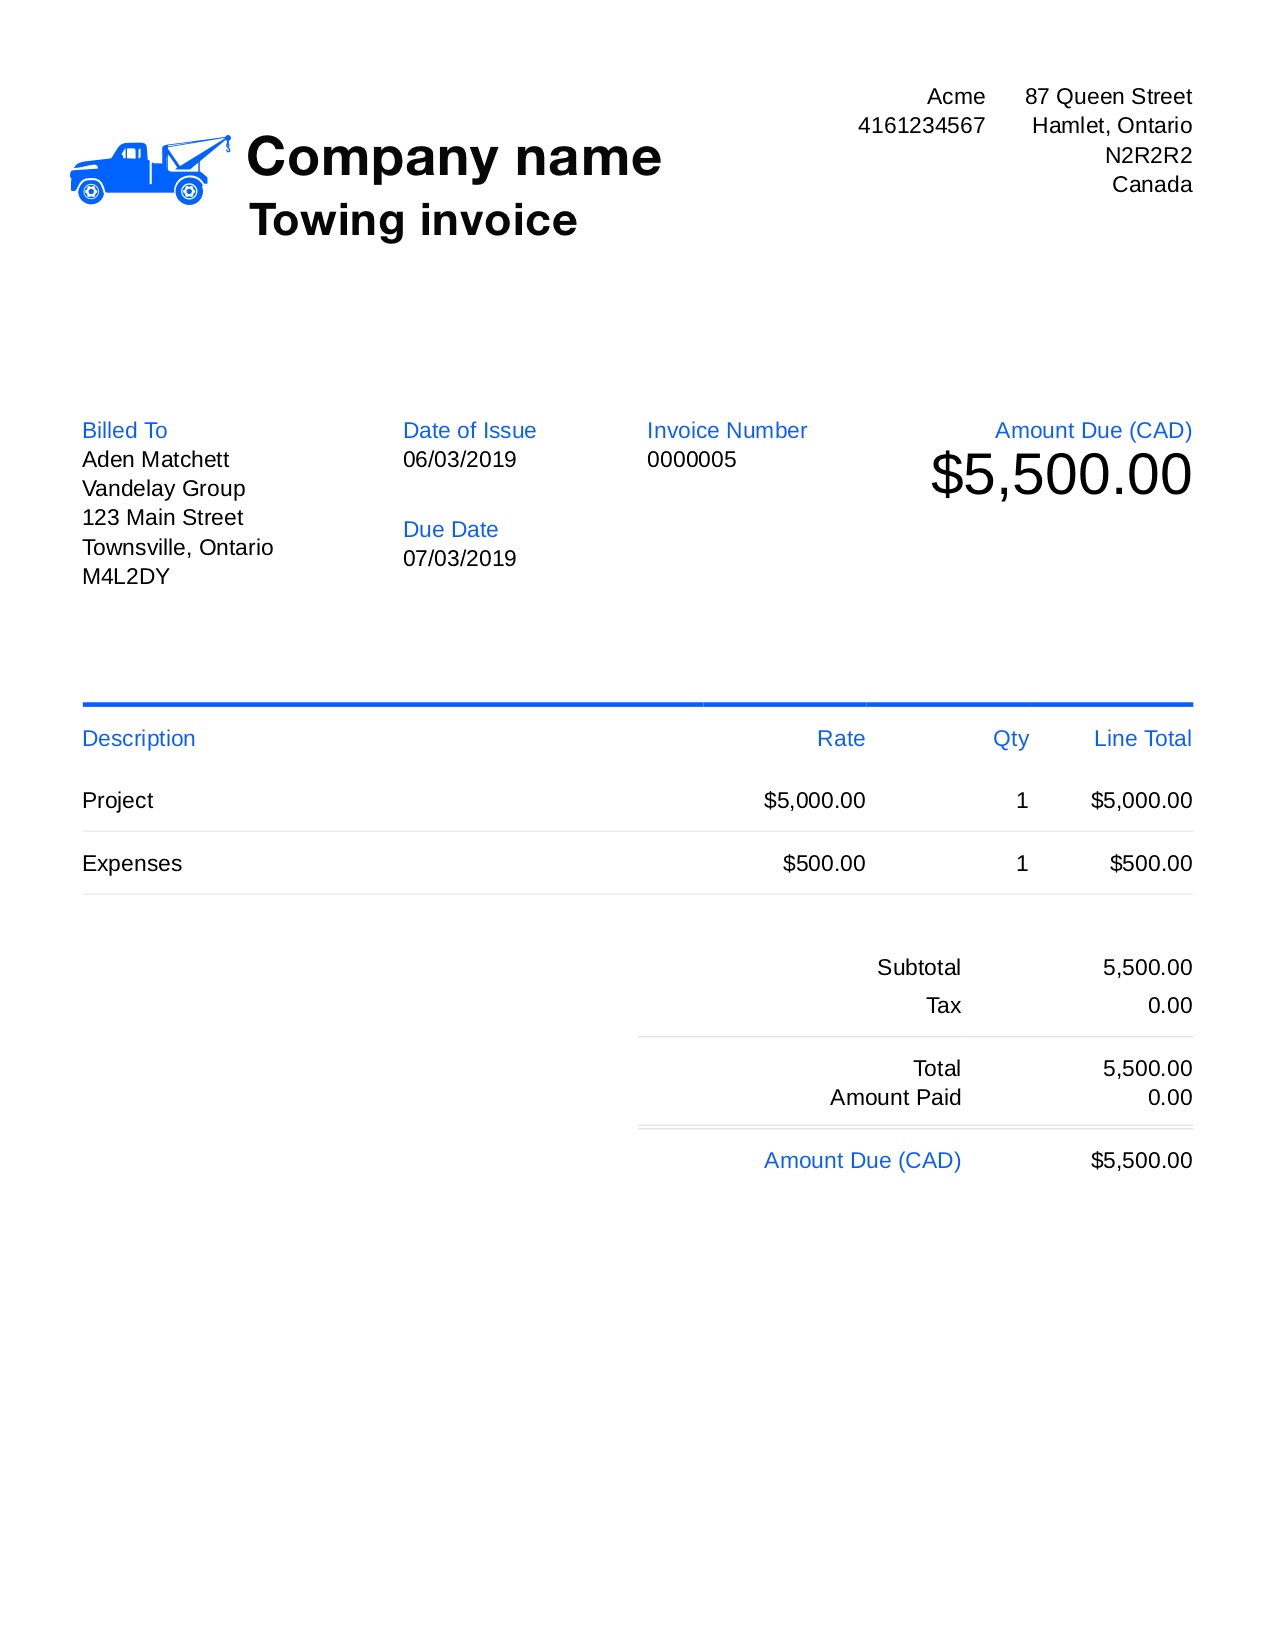 Free Towing Invoice Template. Customize and Send in 90 Seconds